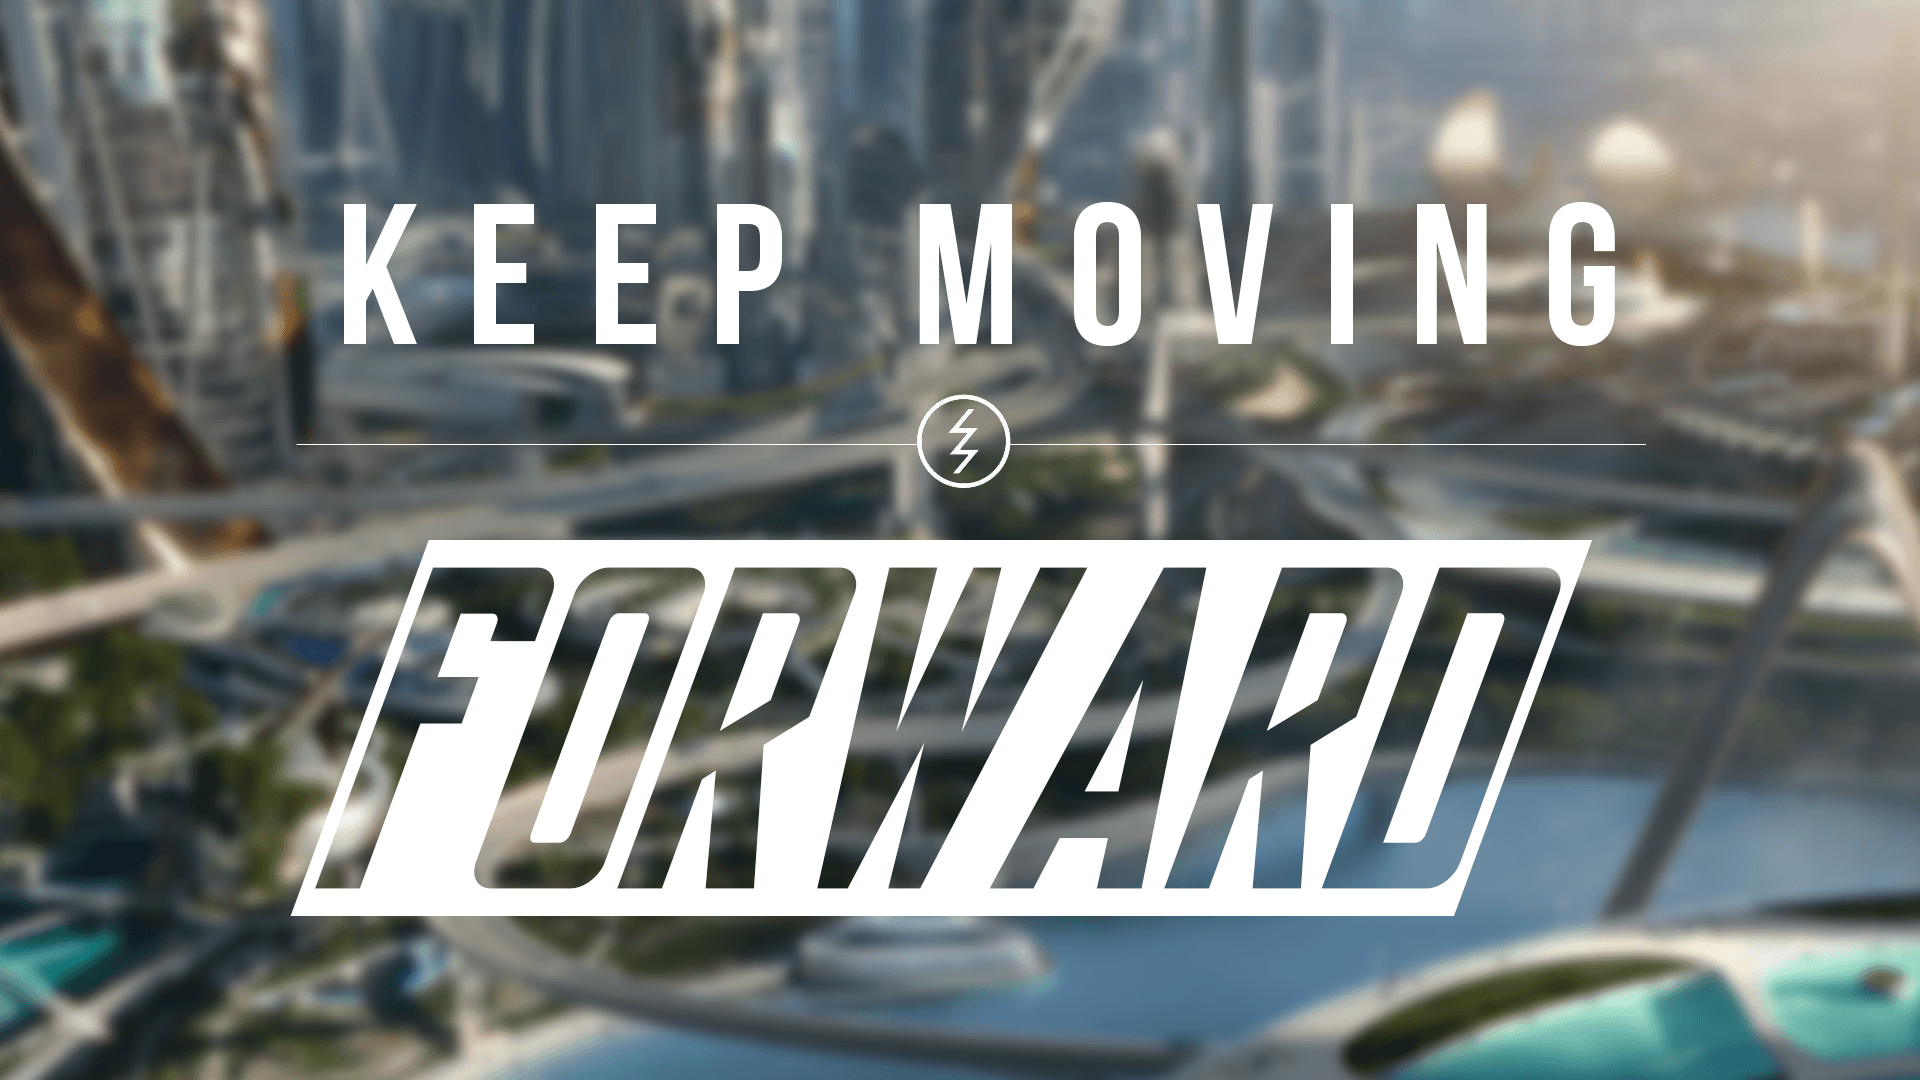 Moving Forward Images  Free Photos PNG Stickers Wallpapers  Backgrounds   rawpixel